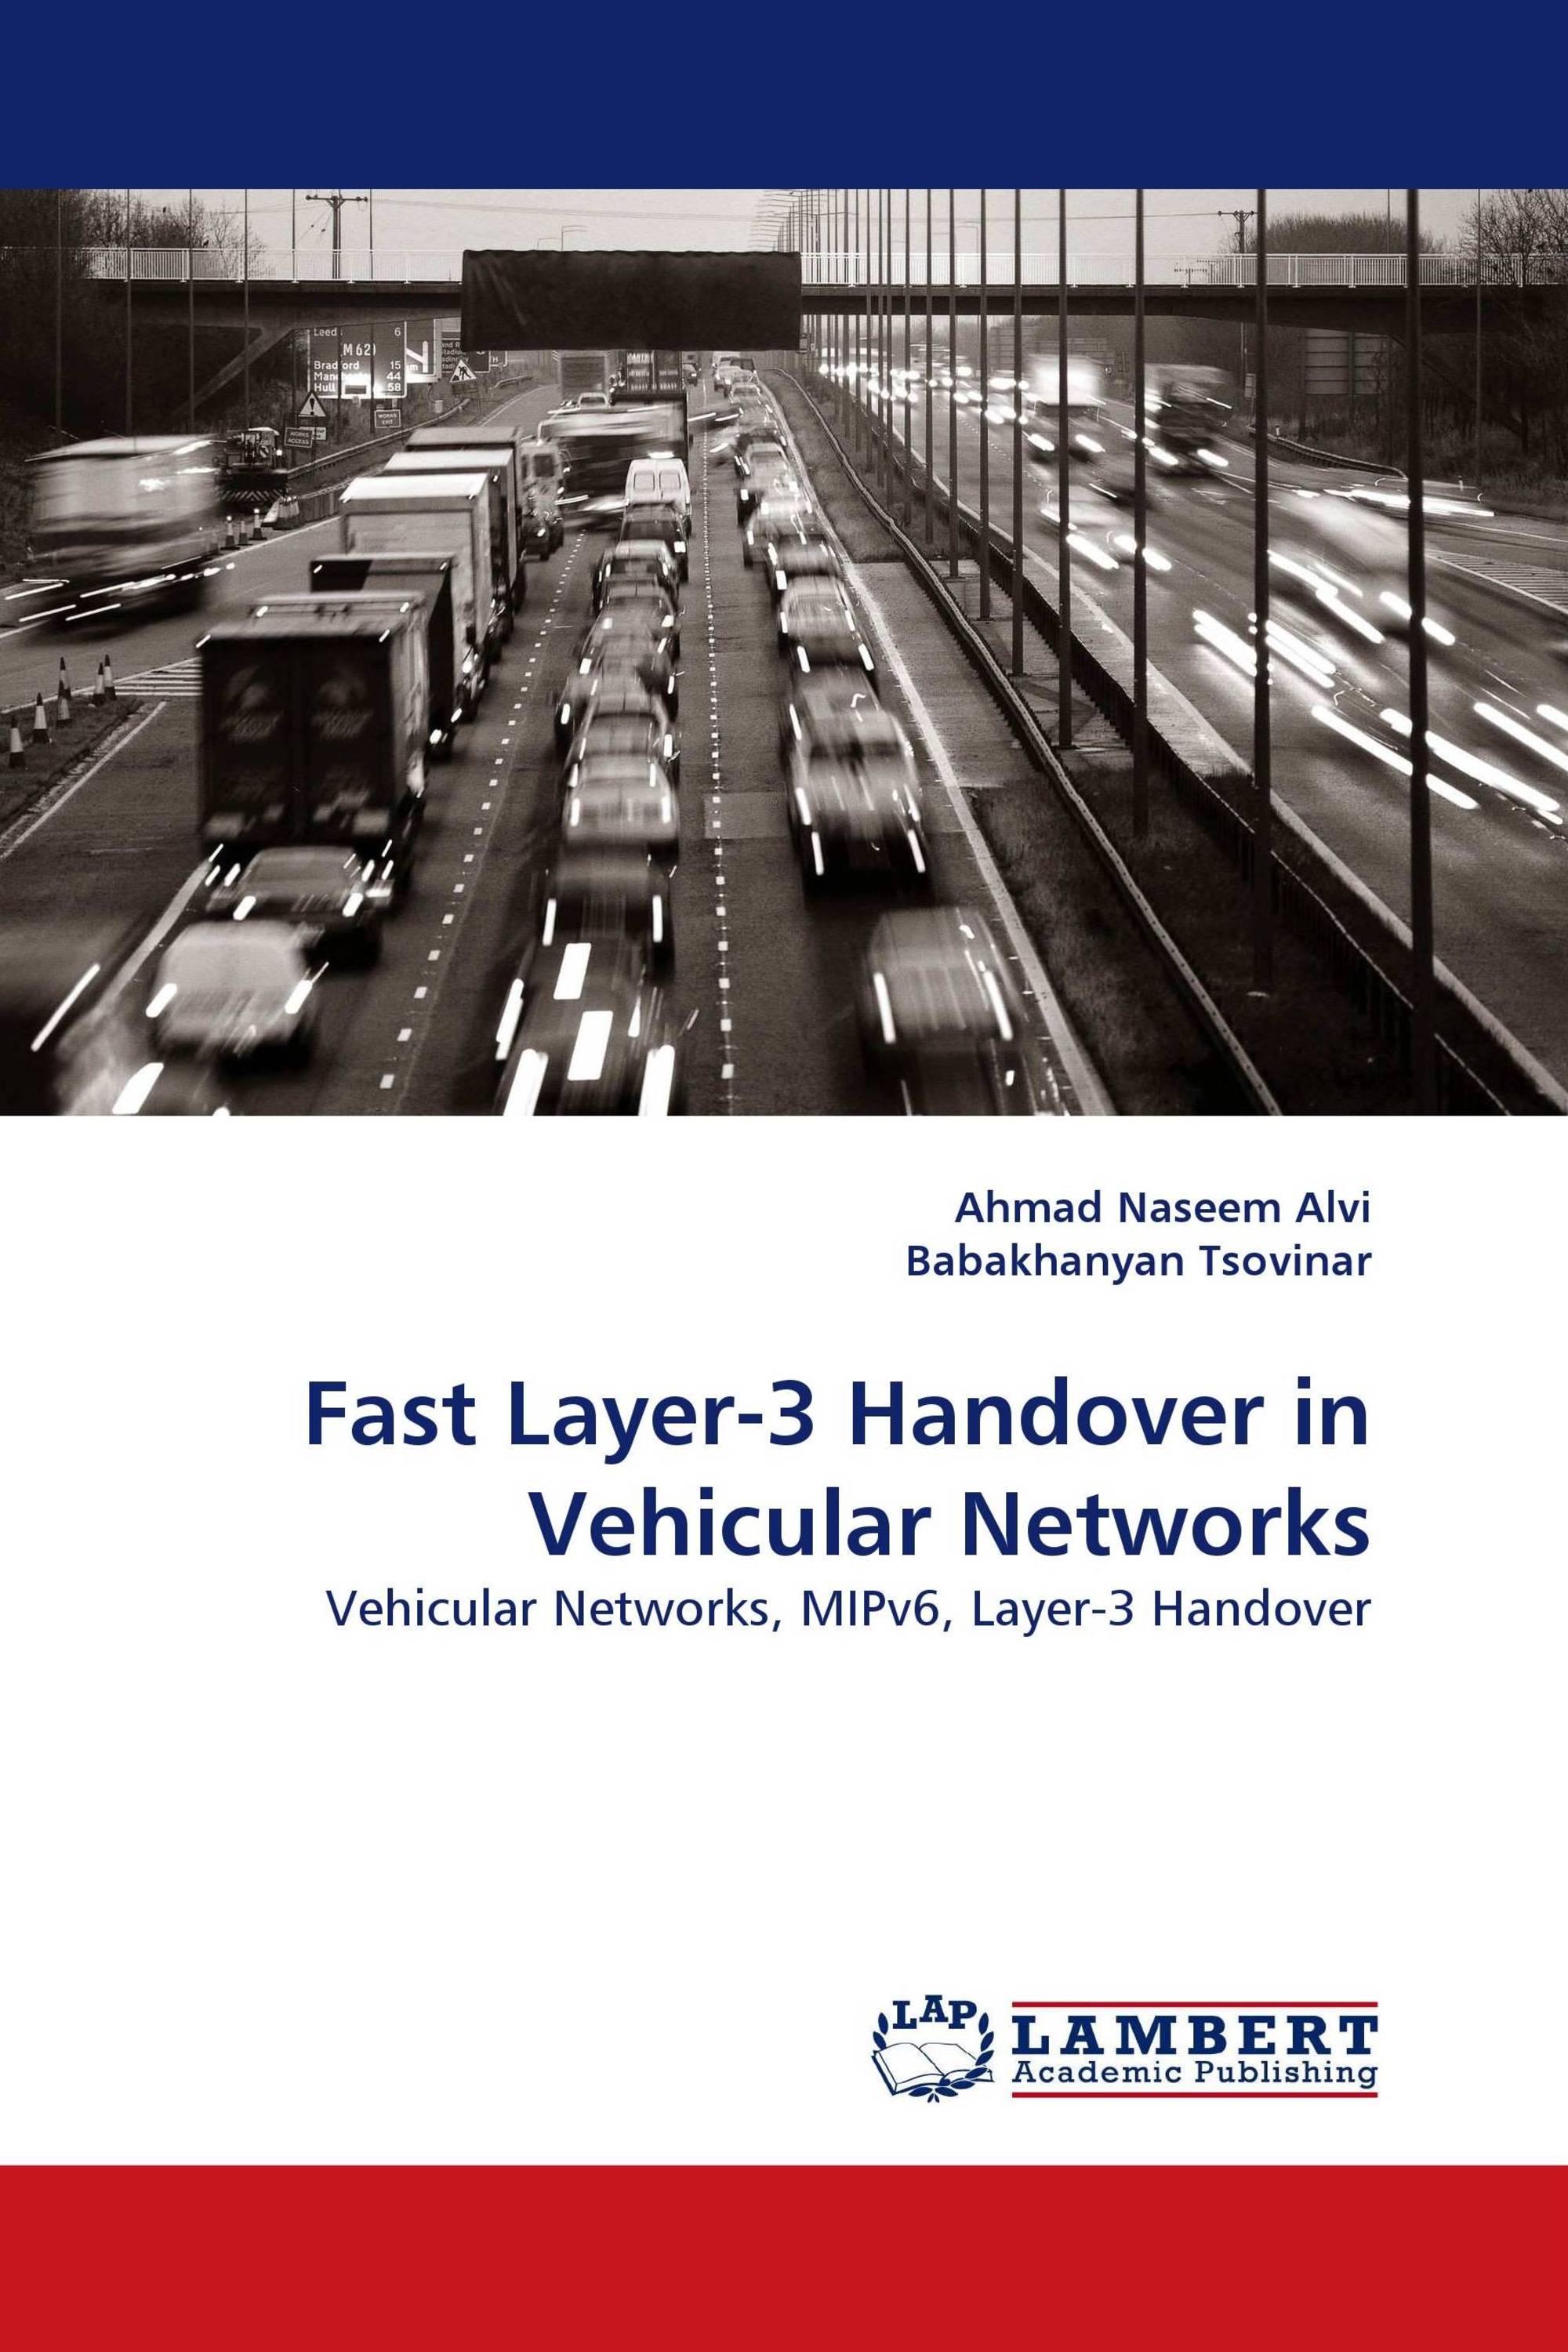 Fast Layer-3 Handover in Vehicular Networks